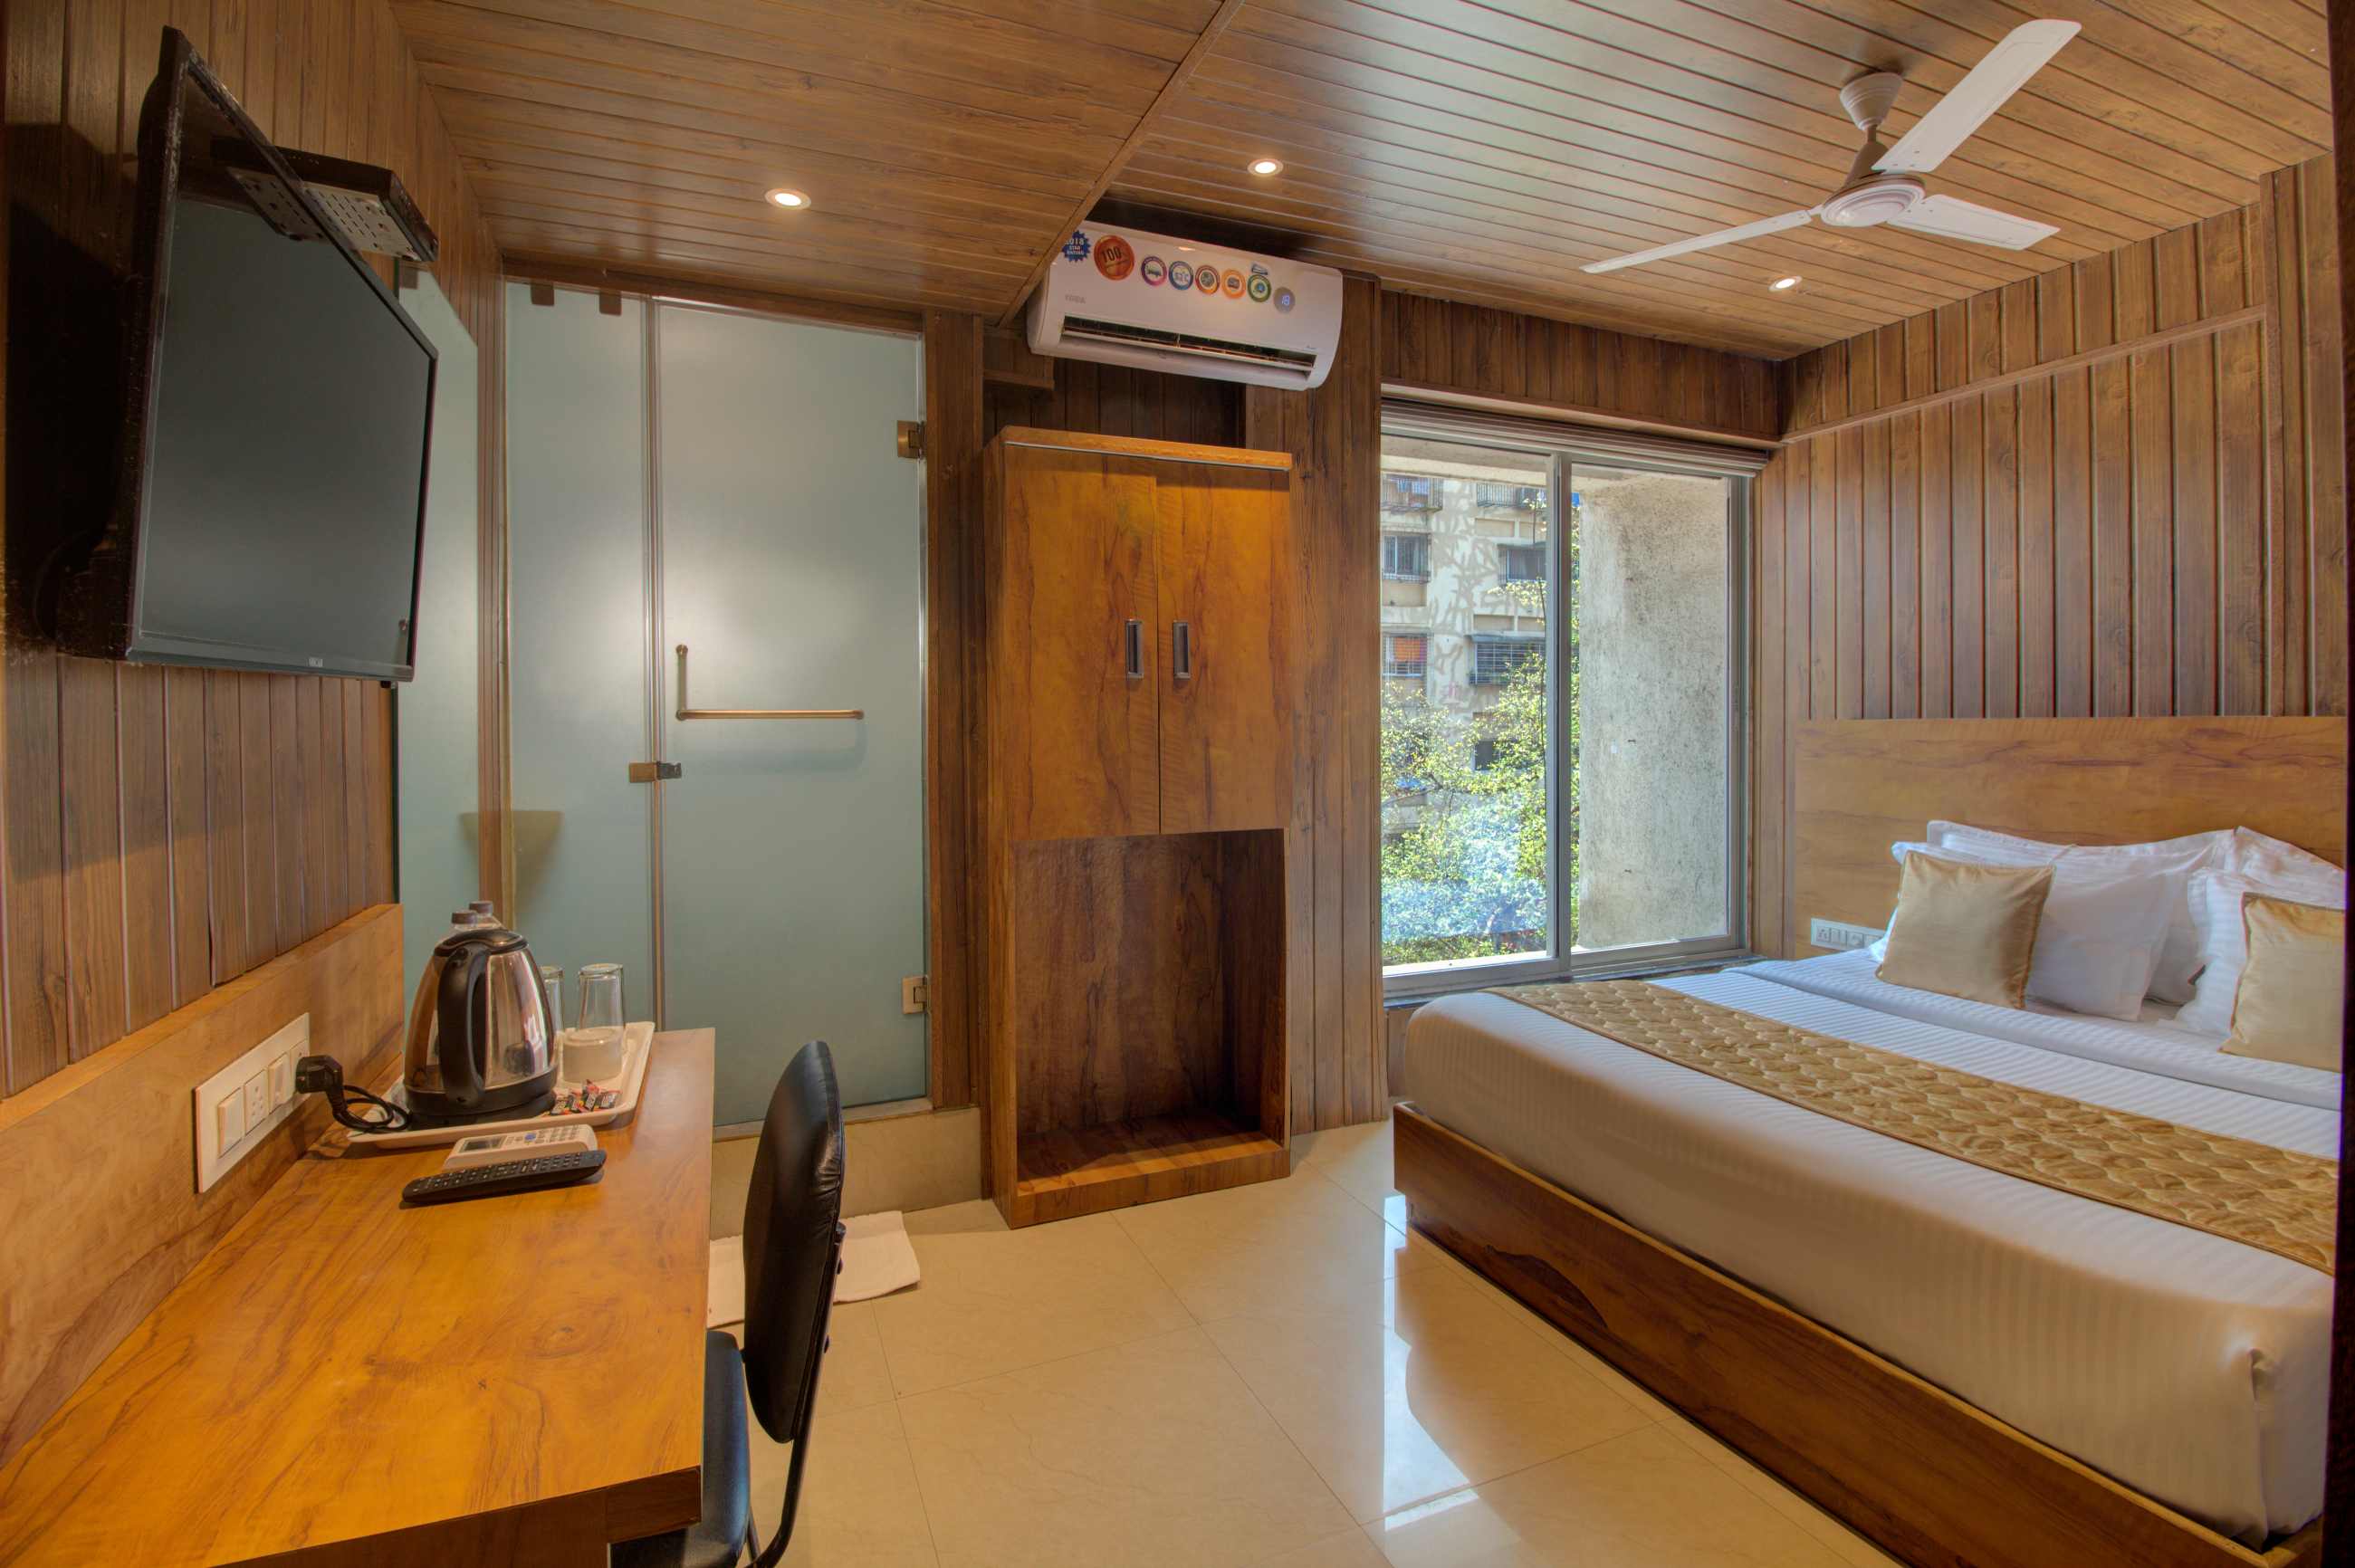 Budget rooms to stay in malad
